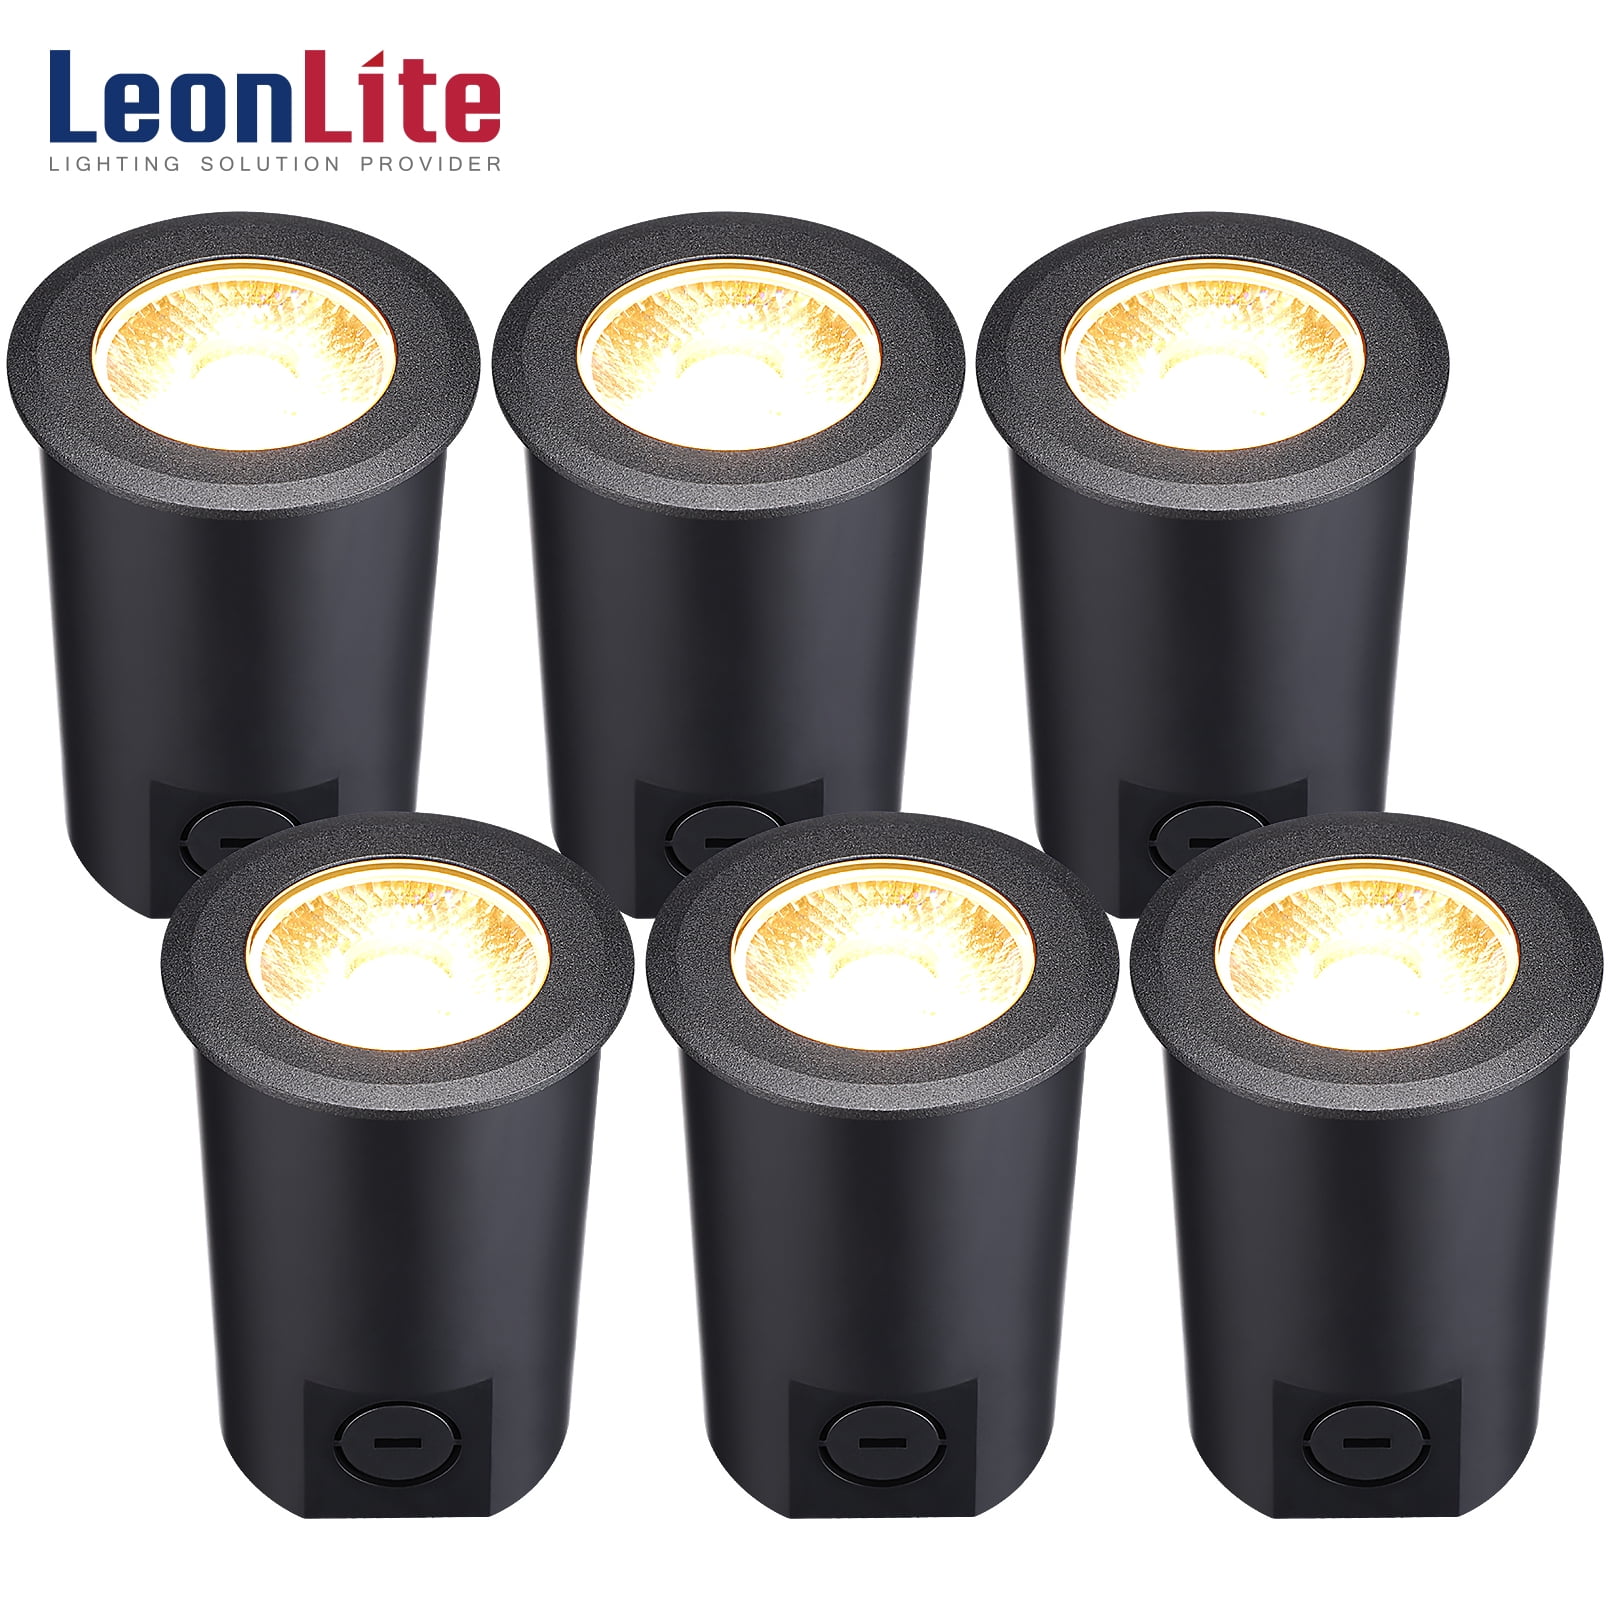 LEONLITE 3W LED Outdoor Well Light Pack of 6 UL Listed Linkable Pathway Lights Lawns 12-24V IP67 Waterproof In-Ground Landscape Lighting Poolside 3000K Warm White for Gardens 3 Years Warranty 